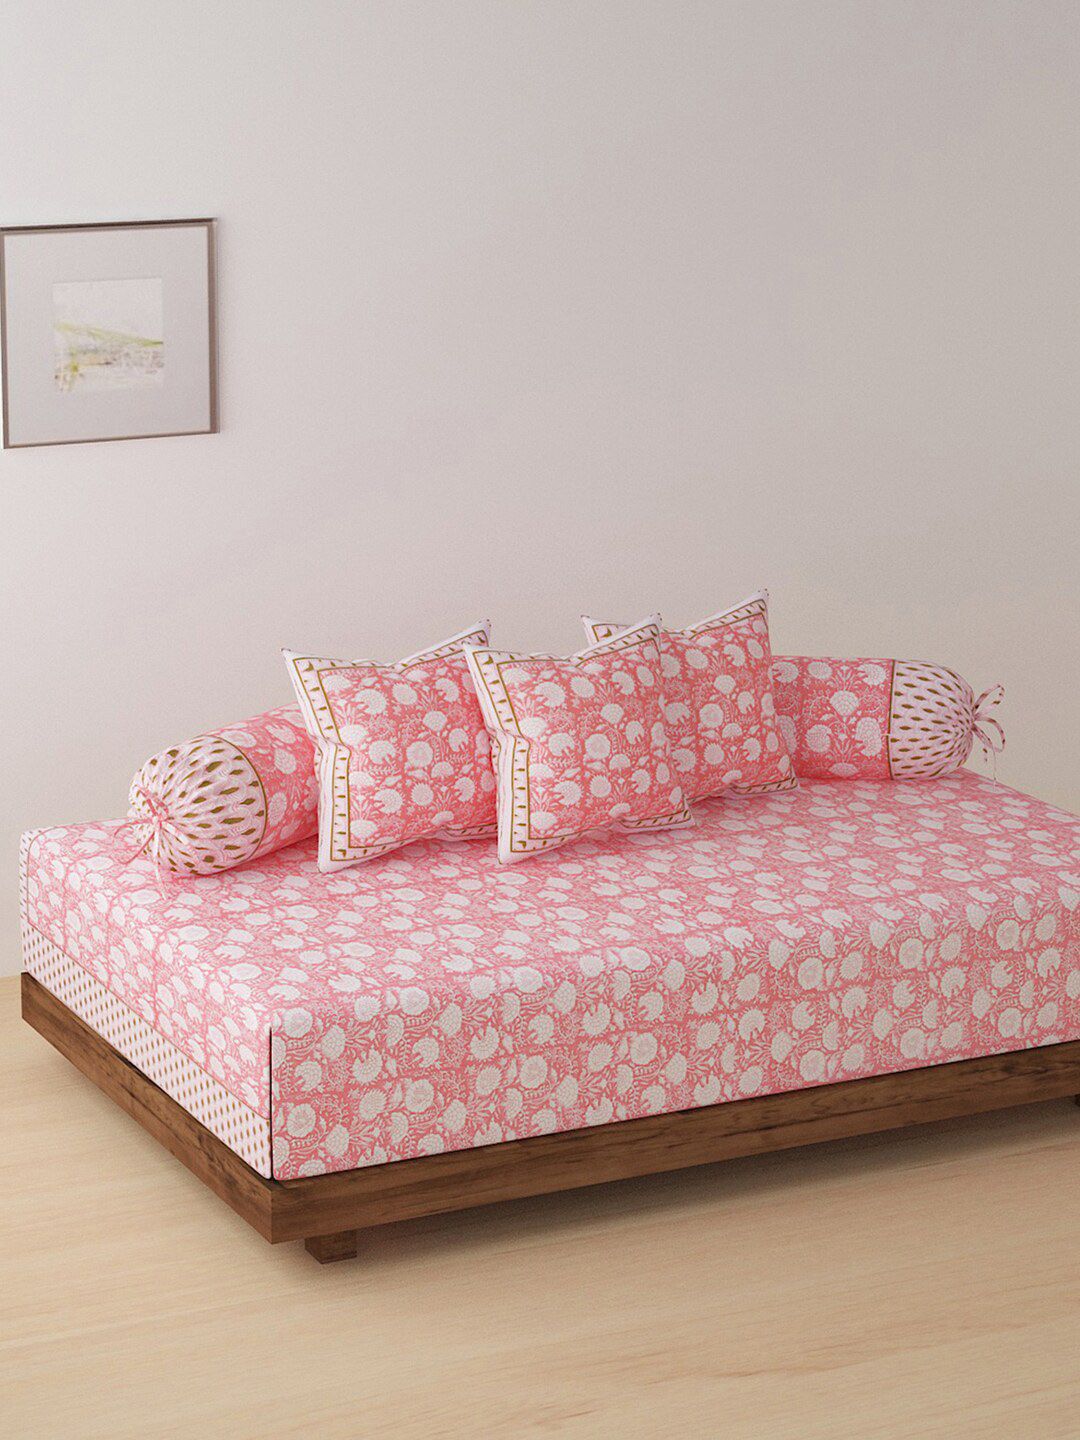 Rajasthan Decor Set Of 6 Peach-Coloured & Whiite Printed Cotton Bedsheet With Bolster & Cushion Covers Price in India